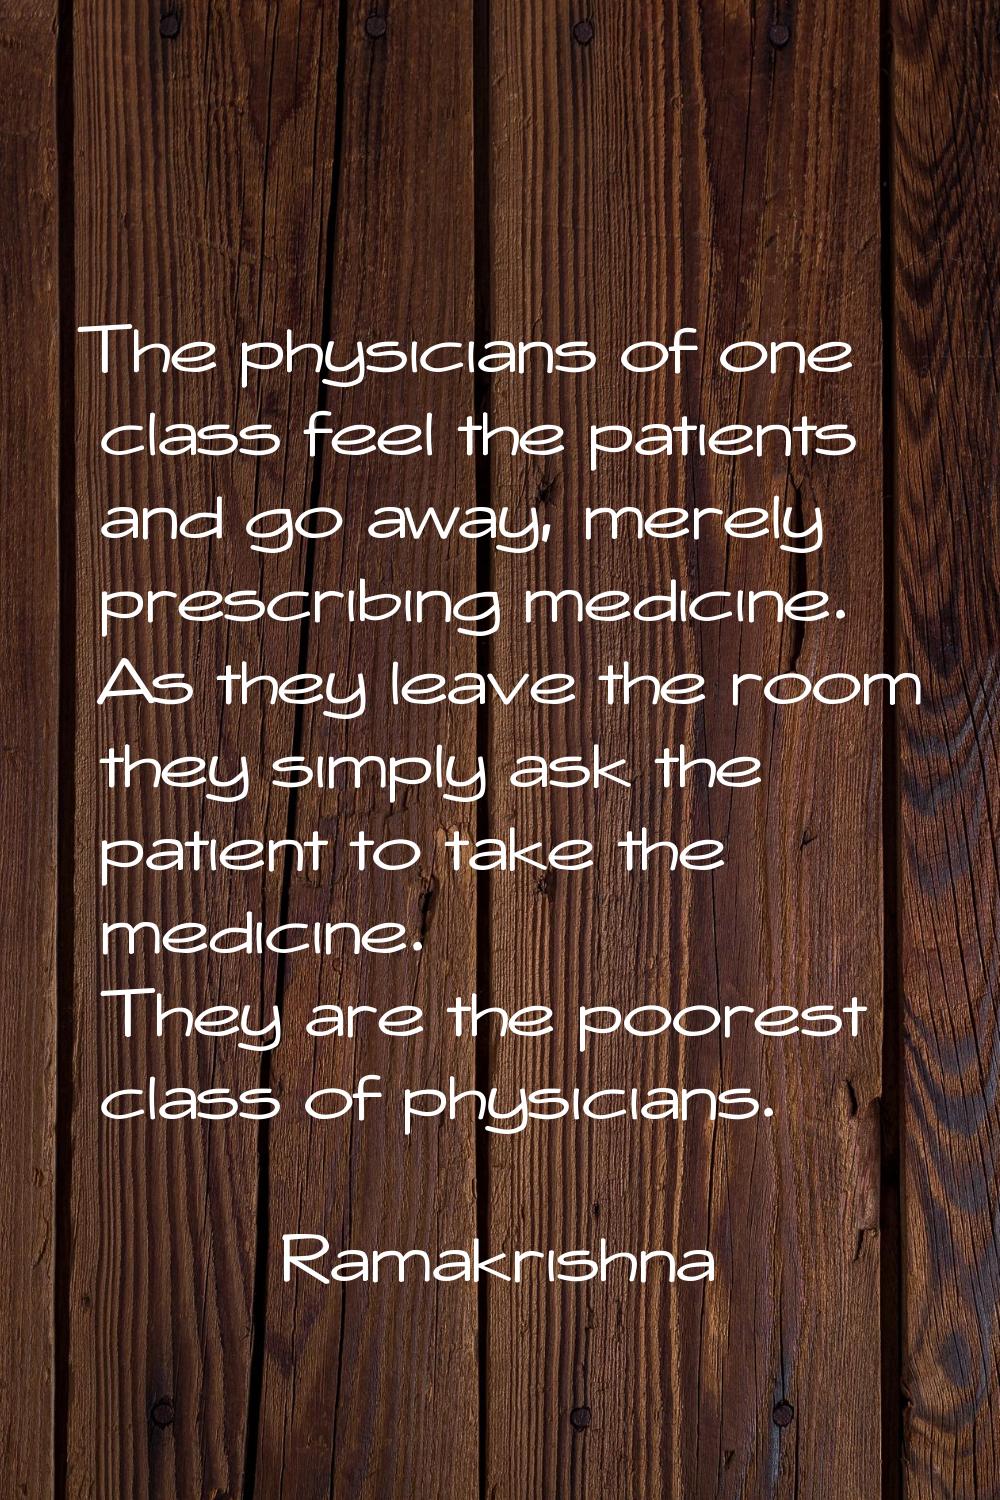 The physicians of one class feel the patients and go away, merely prescribing medicine. As they lea